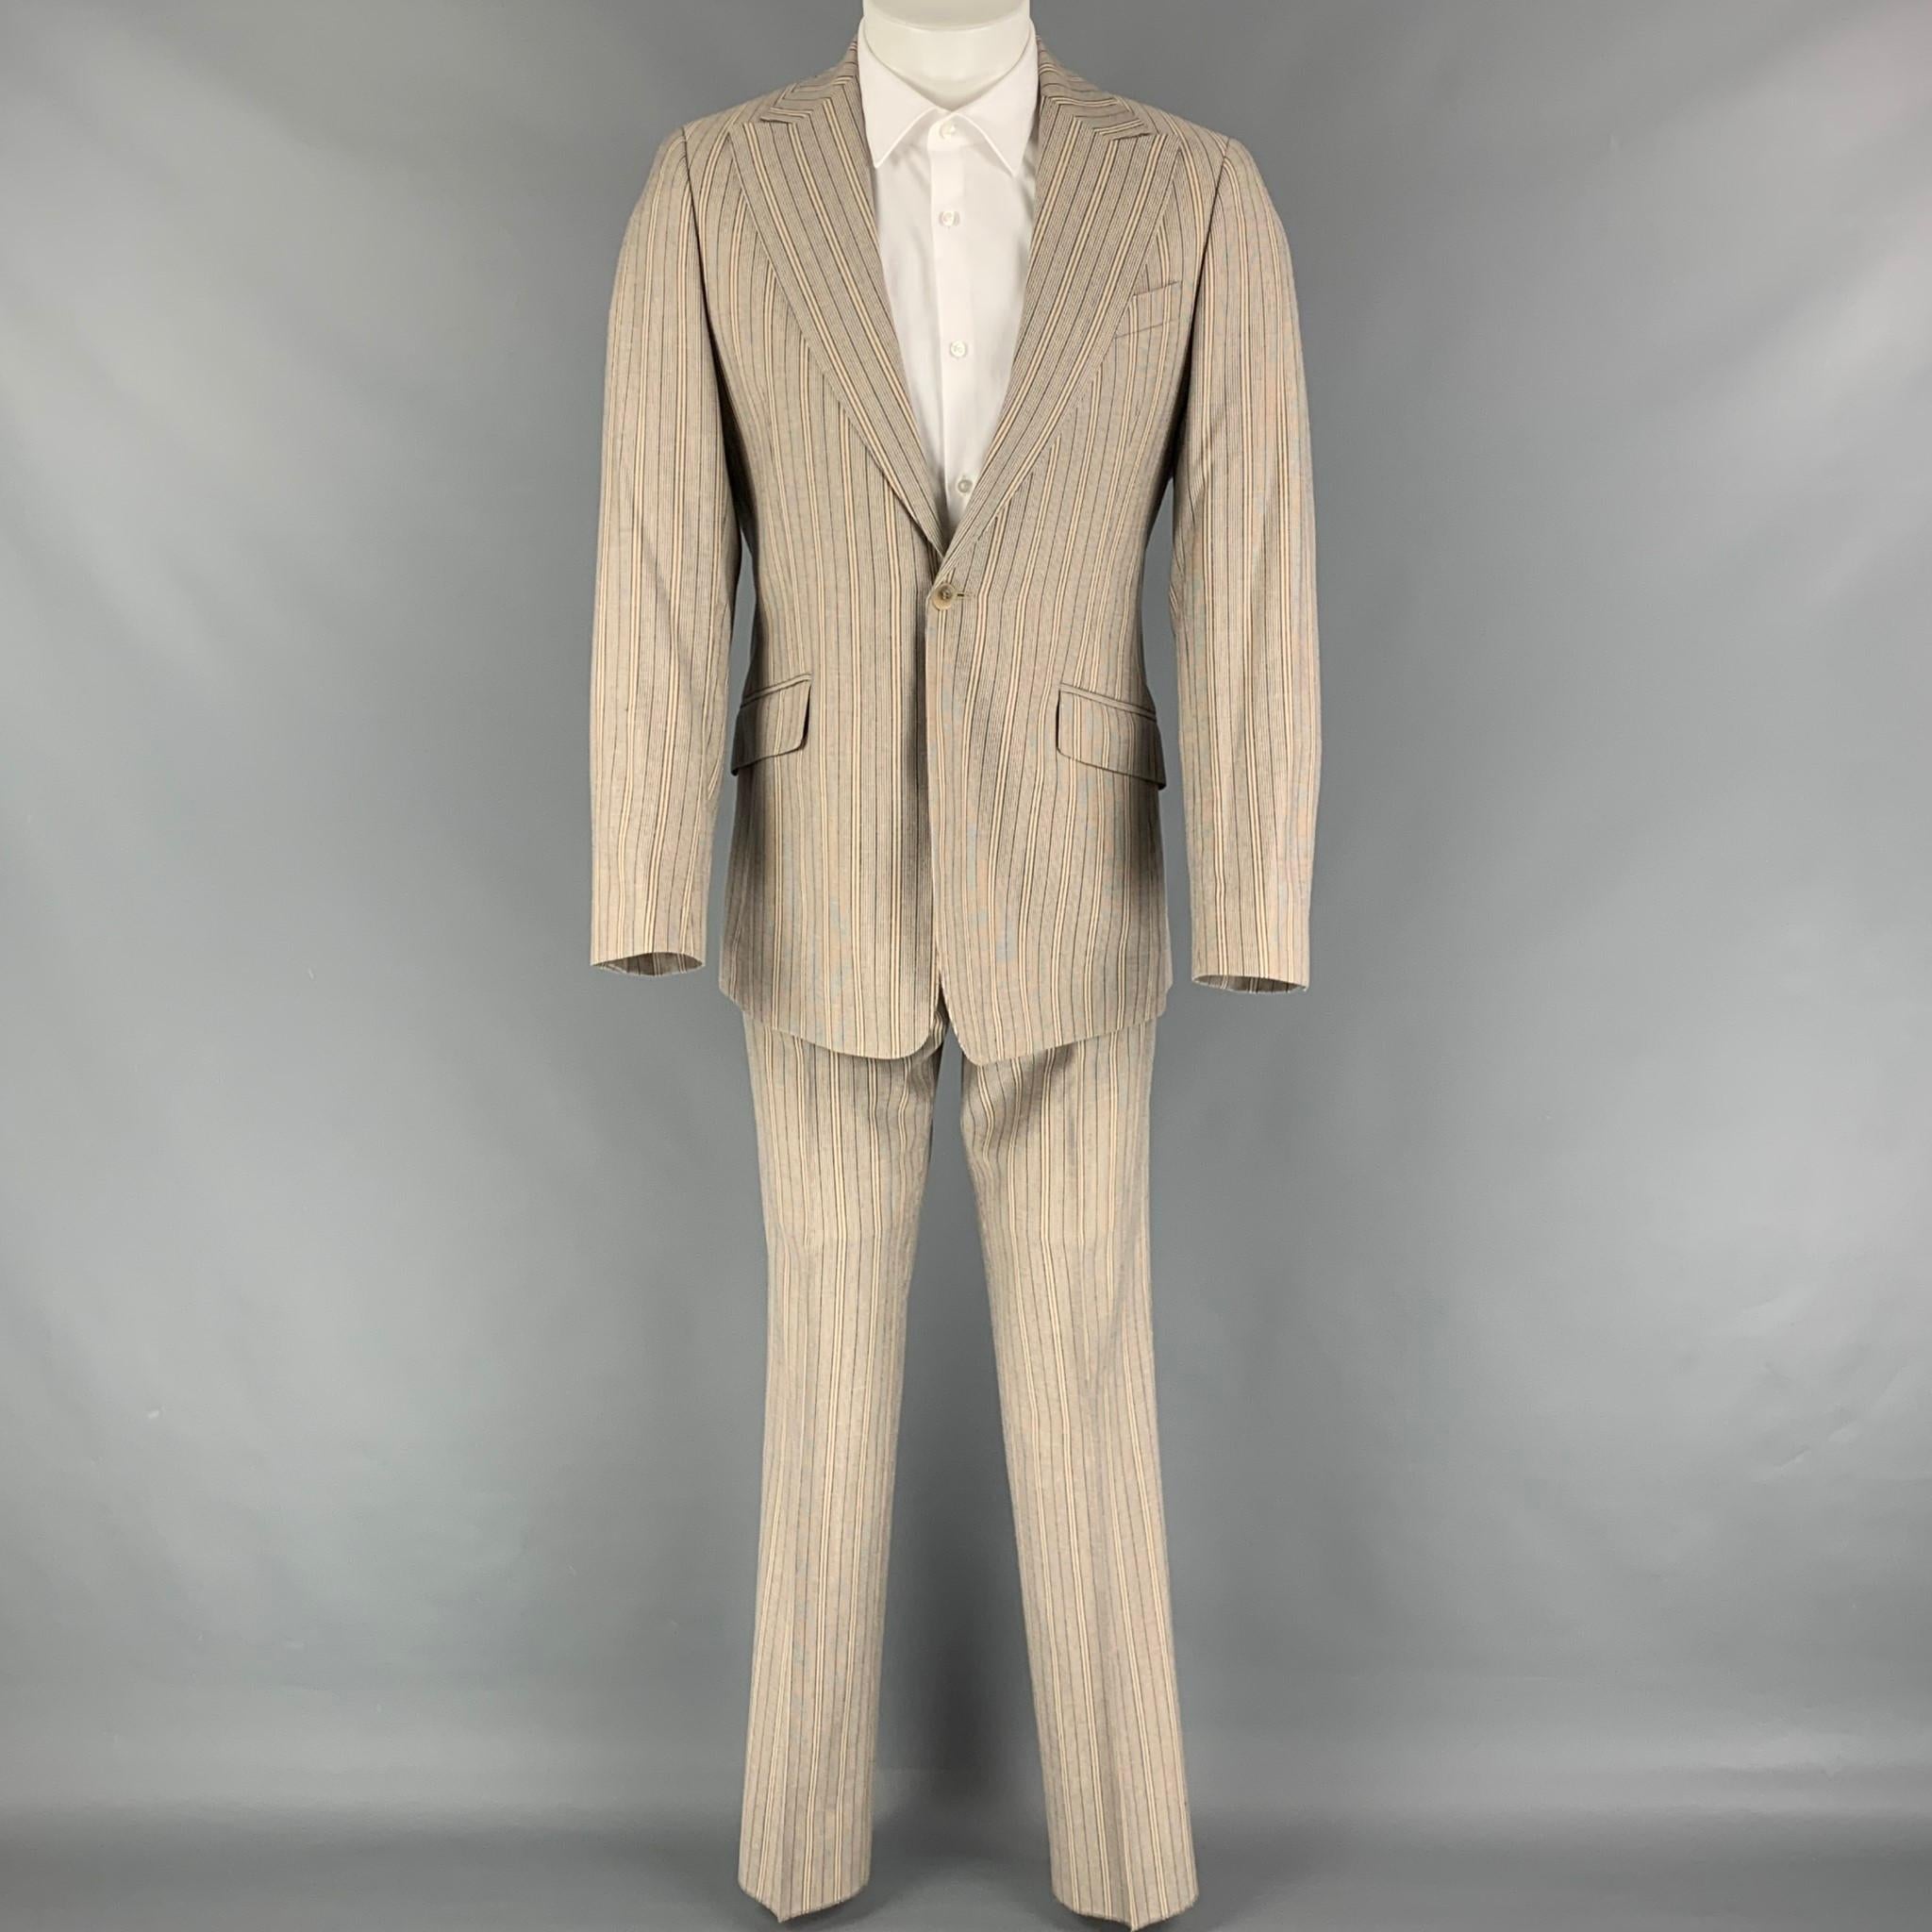 D&G by DOLCE & GABBANA suit comes in a khaki & navy stripe polyester blend with a full liner and includes a single breasted, single button sport coat with a peak lapel and matching flat front trousers. Made in Italy.

Very Good Pre-Owned